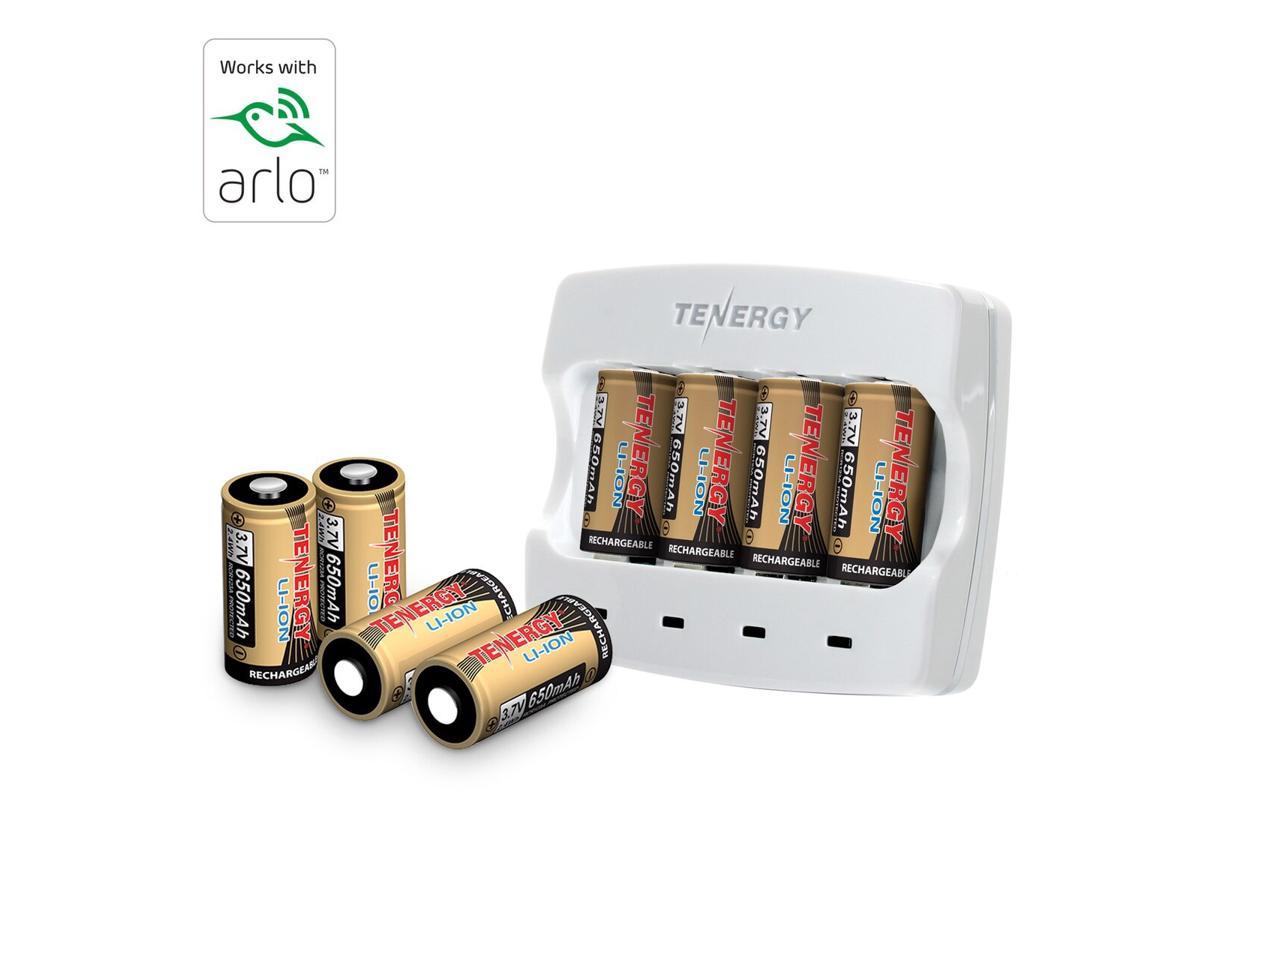 8 Pcs Arlo Certified: Tenergy 3.7V 650mAh Arlo Batteries Fast Charger for Arlo Wireless HD Cameras UL/UN/CE/FCC Listed VMC3030/VMK3200/VMS3330/3430/3530 